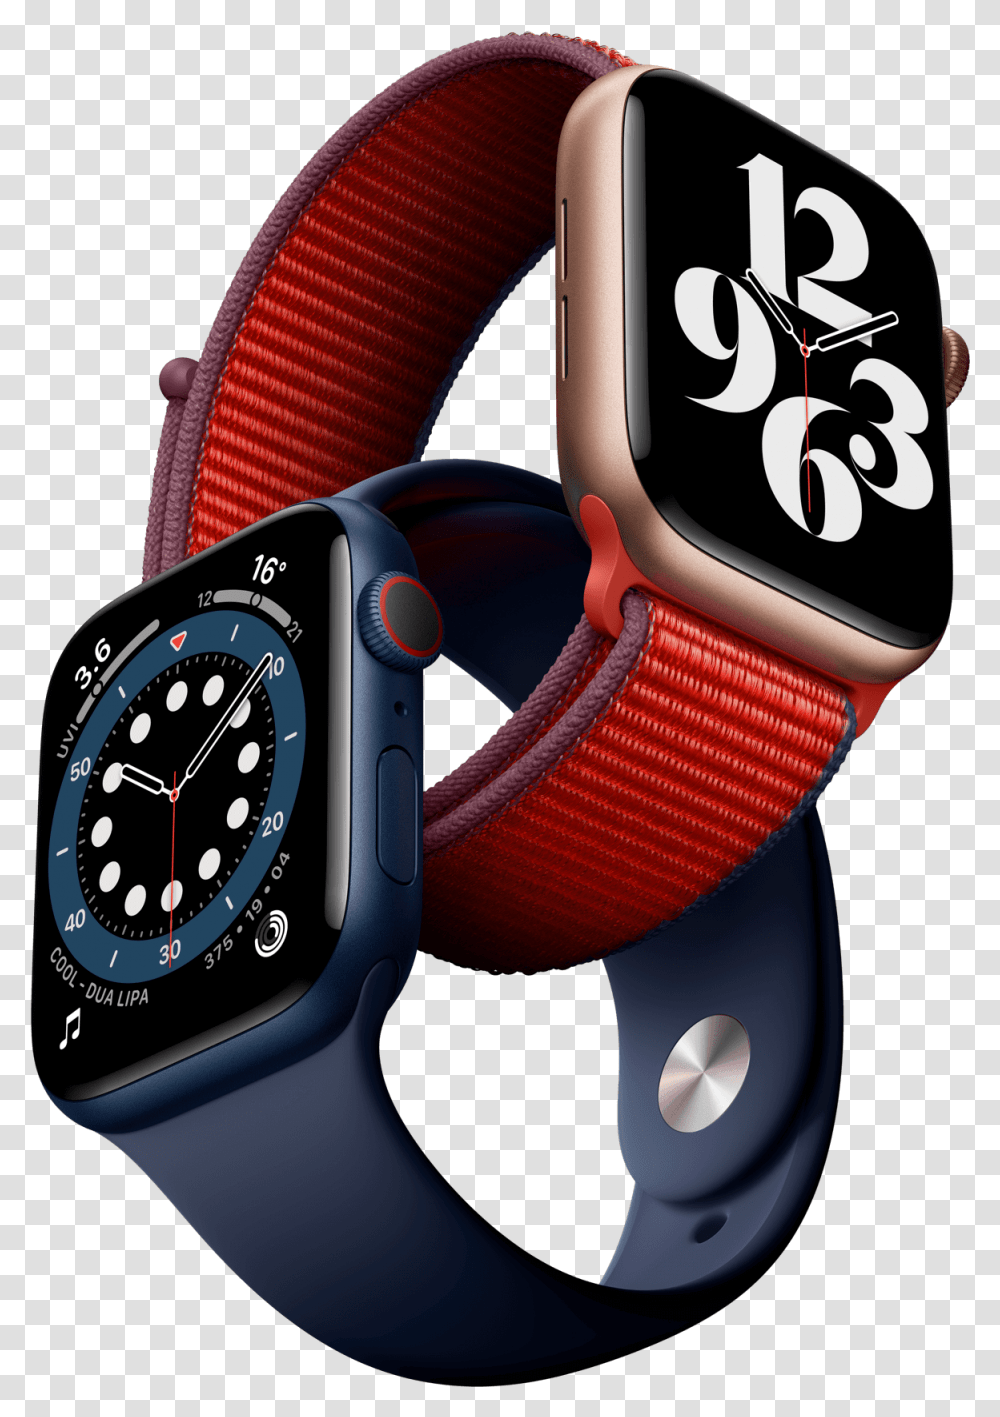 Apple Watch Cellular Plans For Your Family Truphone Apple Watch Series 6, Wristwatch, Digital Watch, Headphones, Electronics Transparent Png